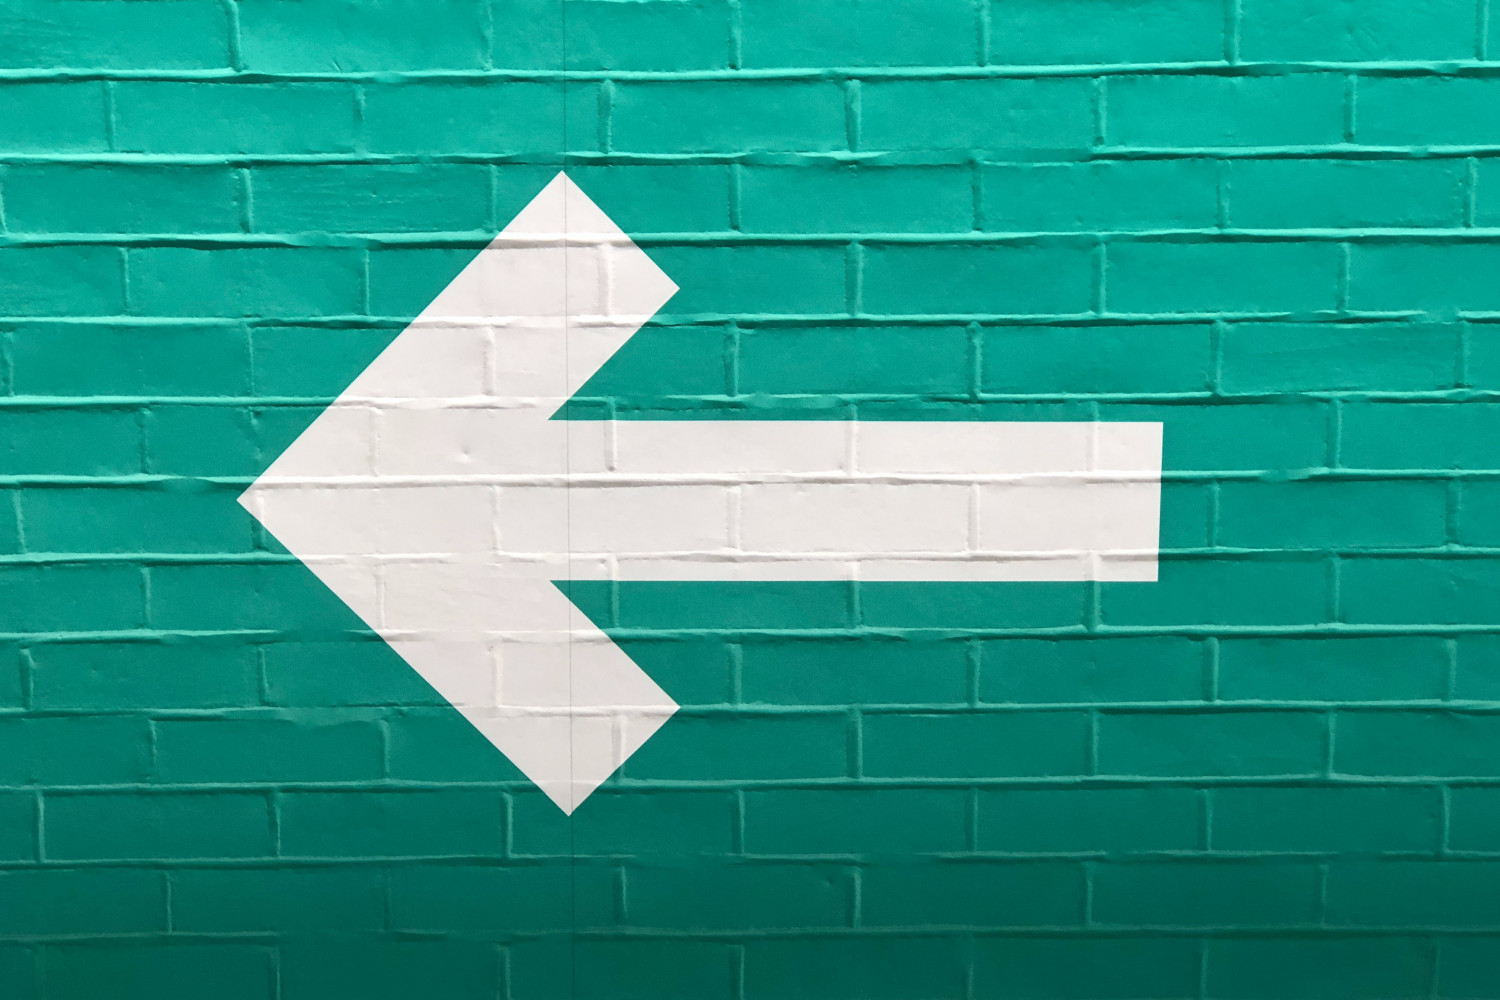 Image of a left-pointing, white arrow on a bright green brick wall